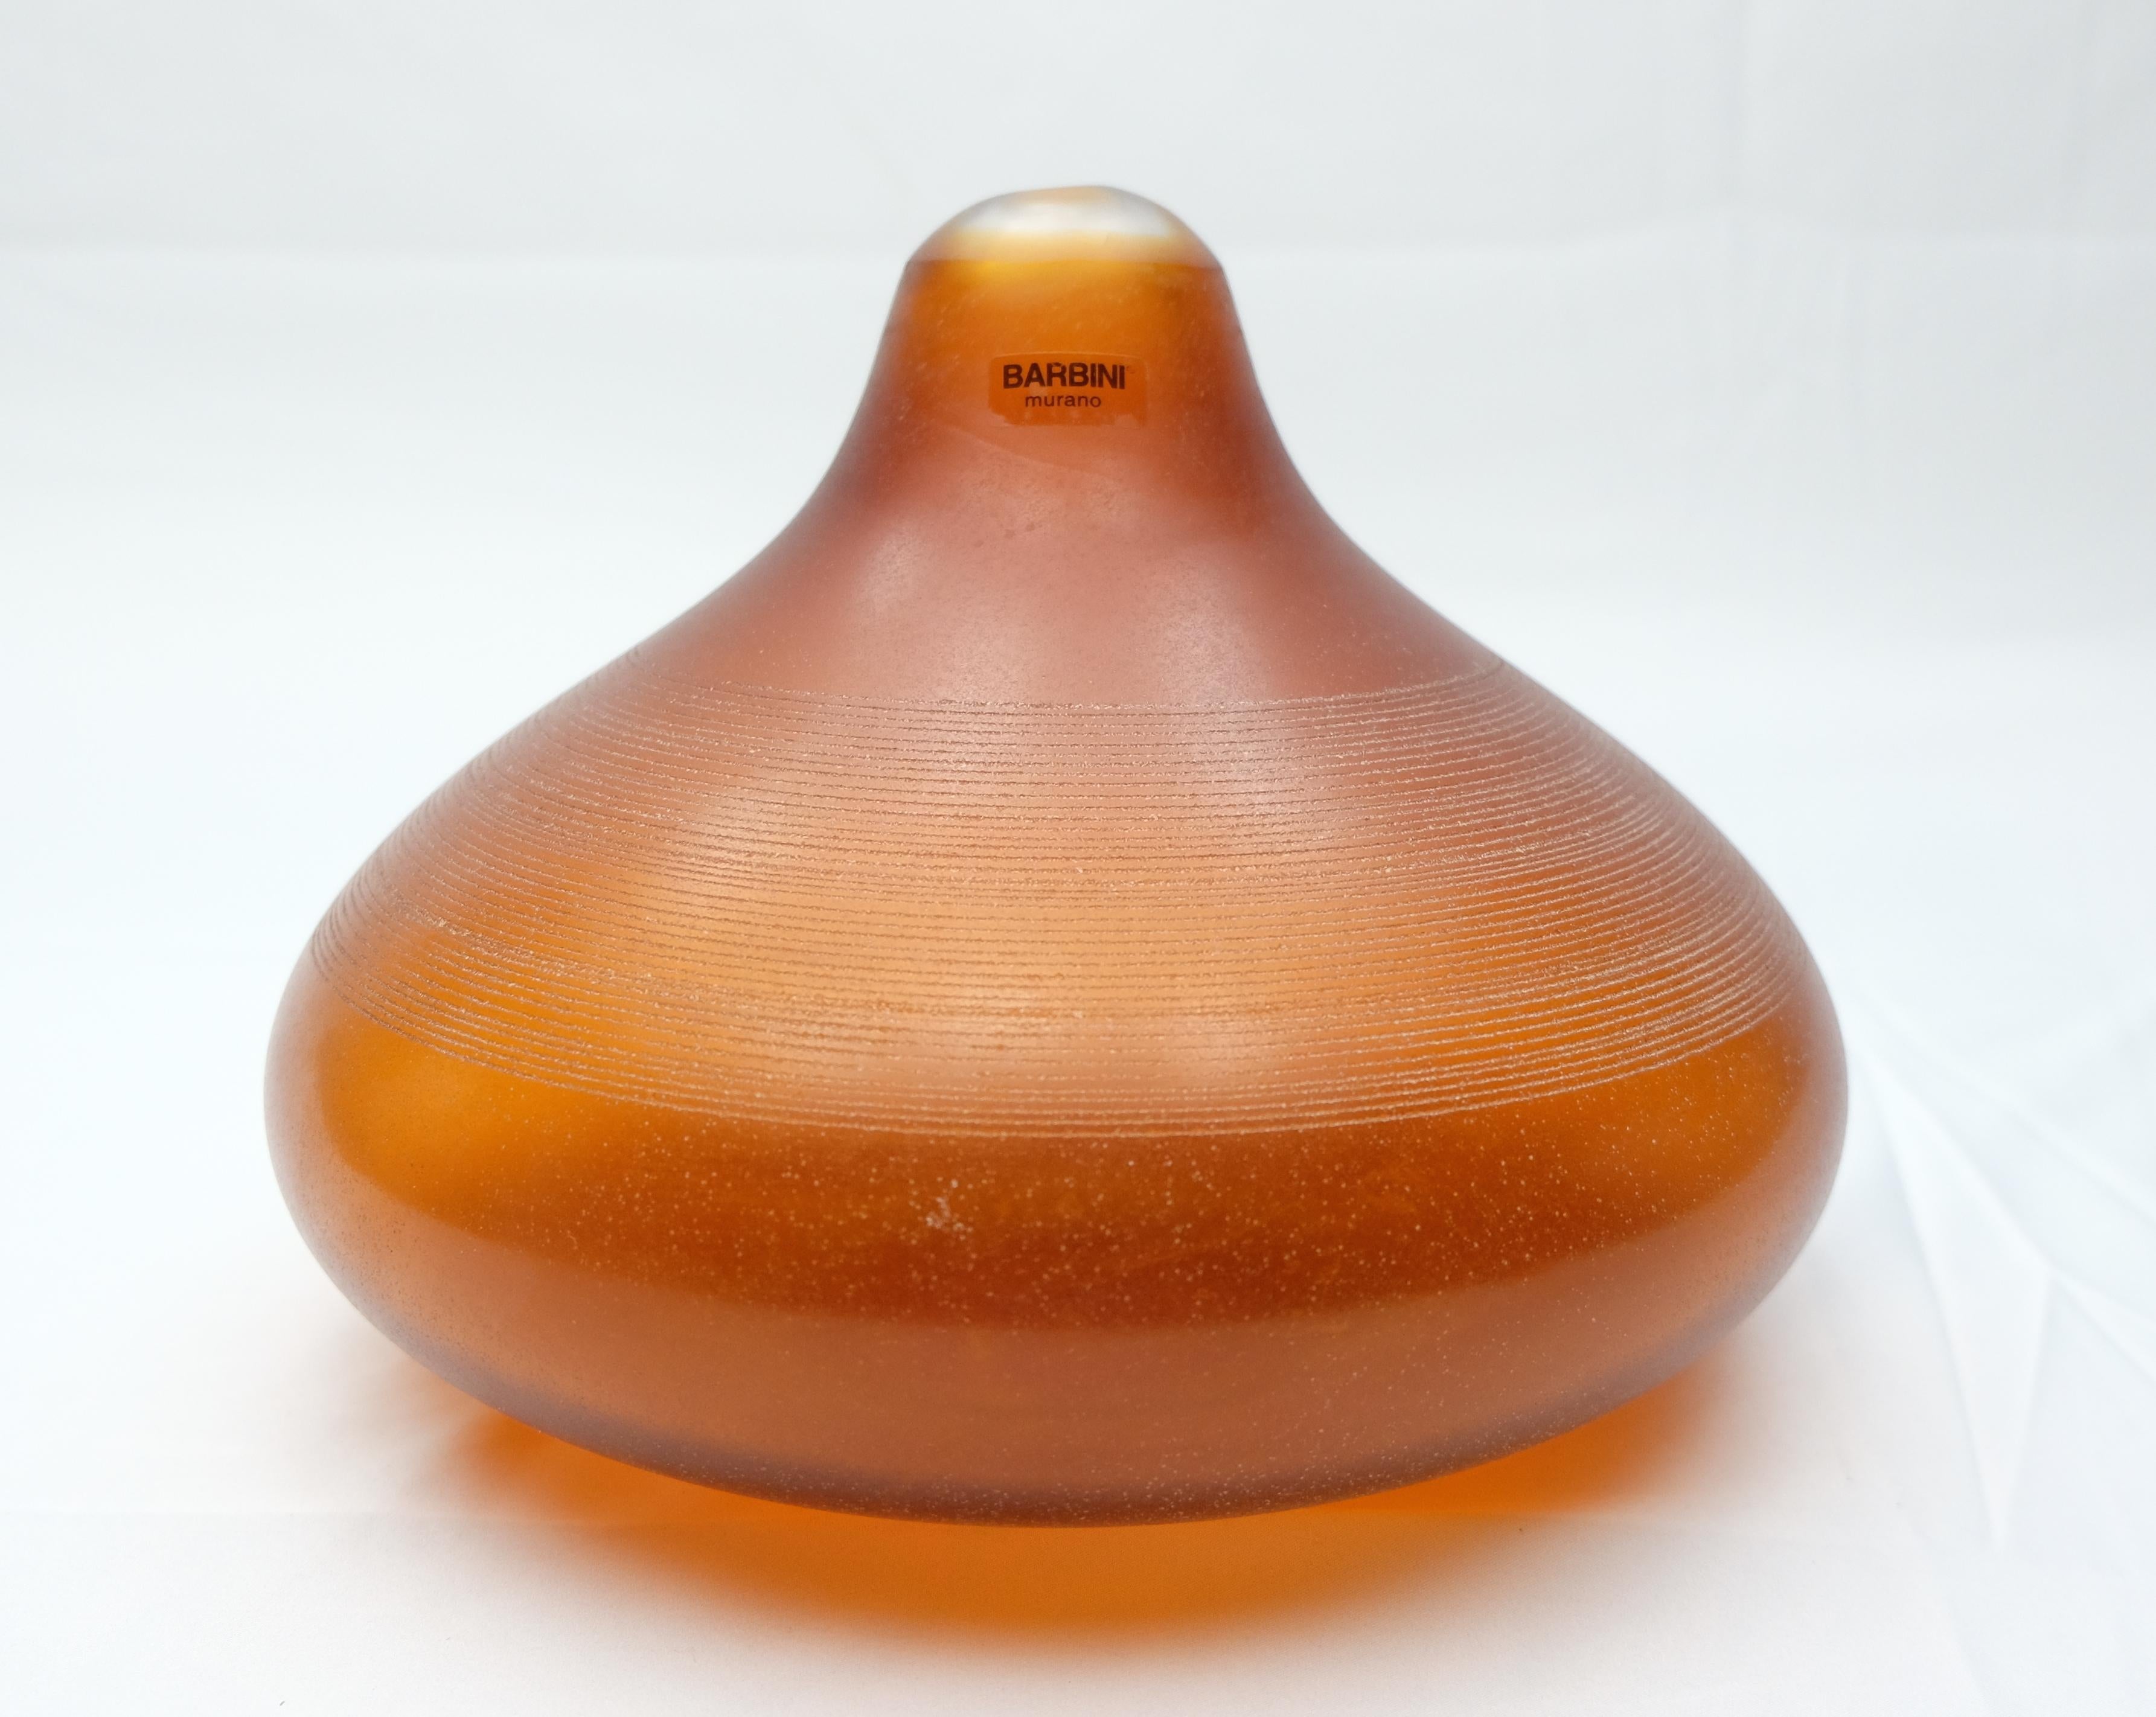 Offered for sale is an amber round blown Murano glass single stem vase from Barbini. The sculptural form is organic and is complemented by the natural coloring. The vase is lightly textured and scored with a polished top. The piece is signed on the